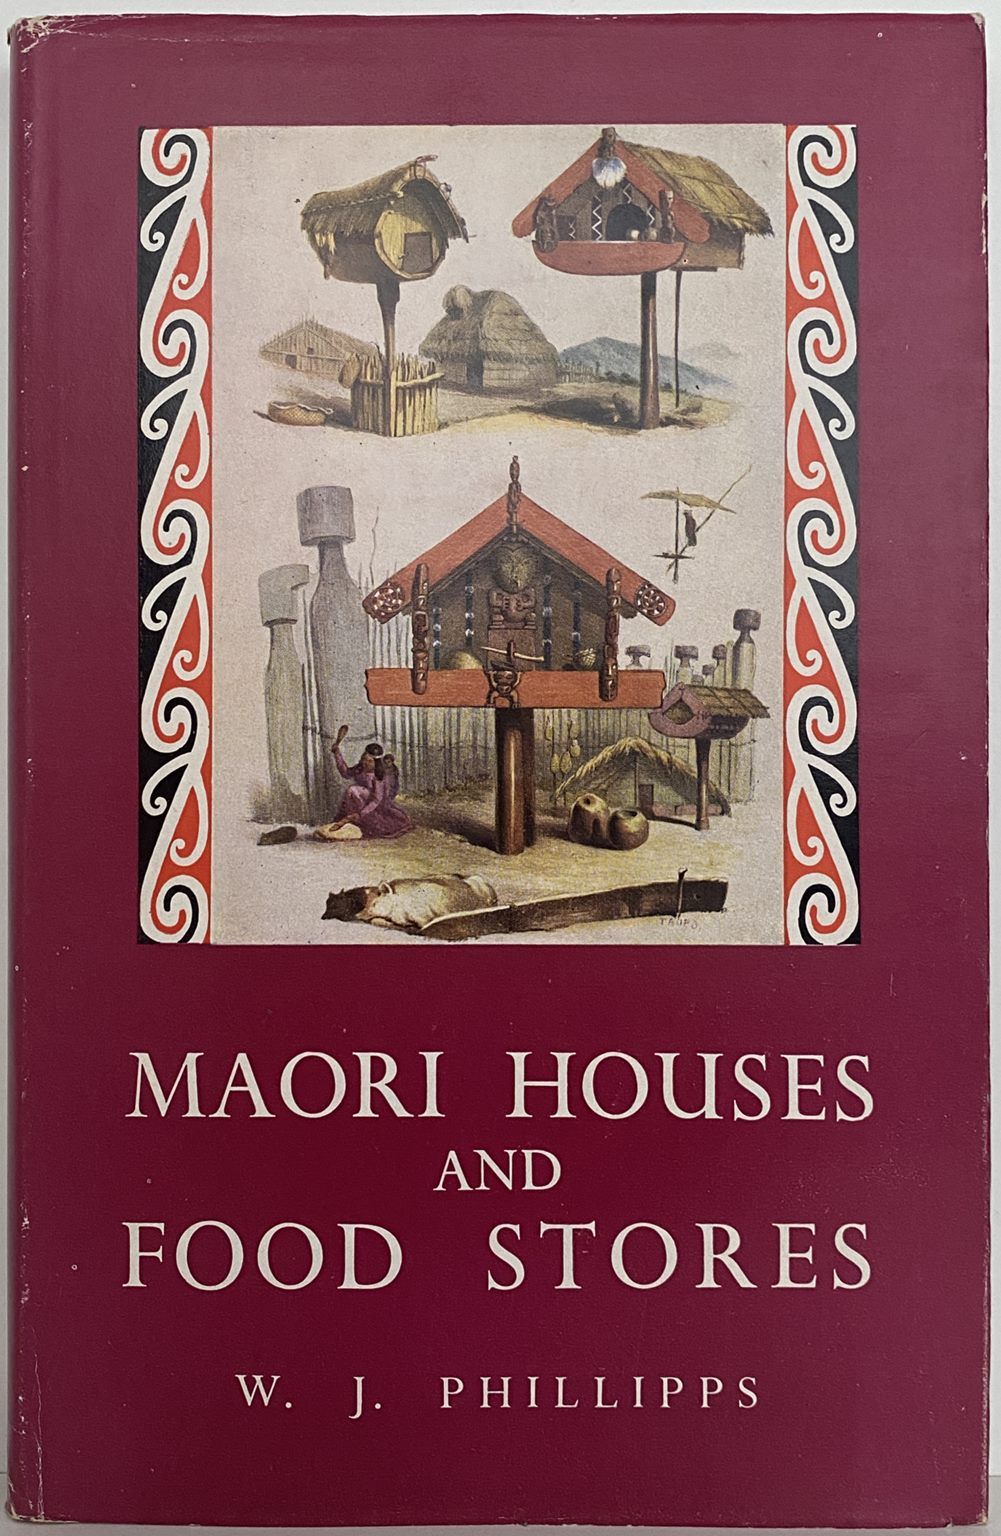 MAORI HOUSES AND FOOD STORES